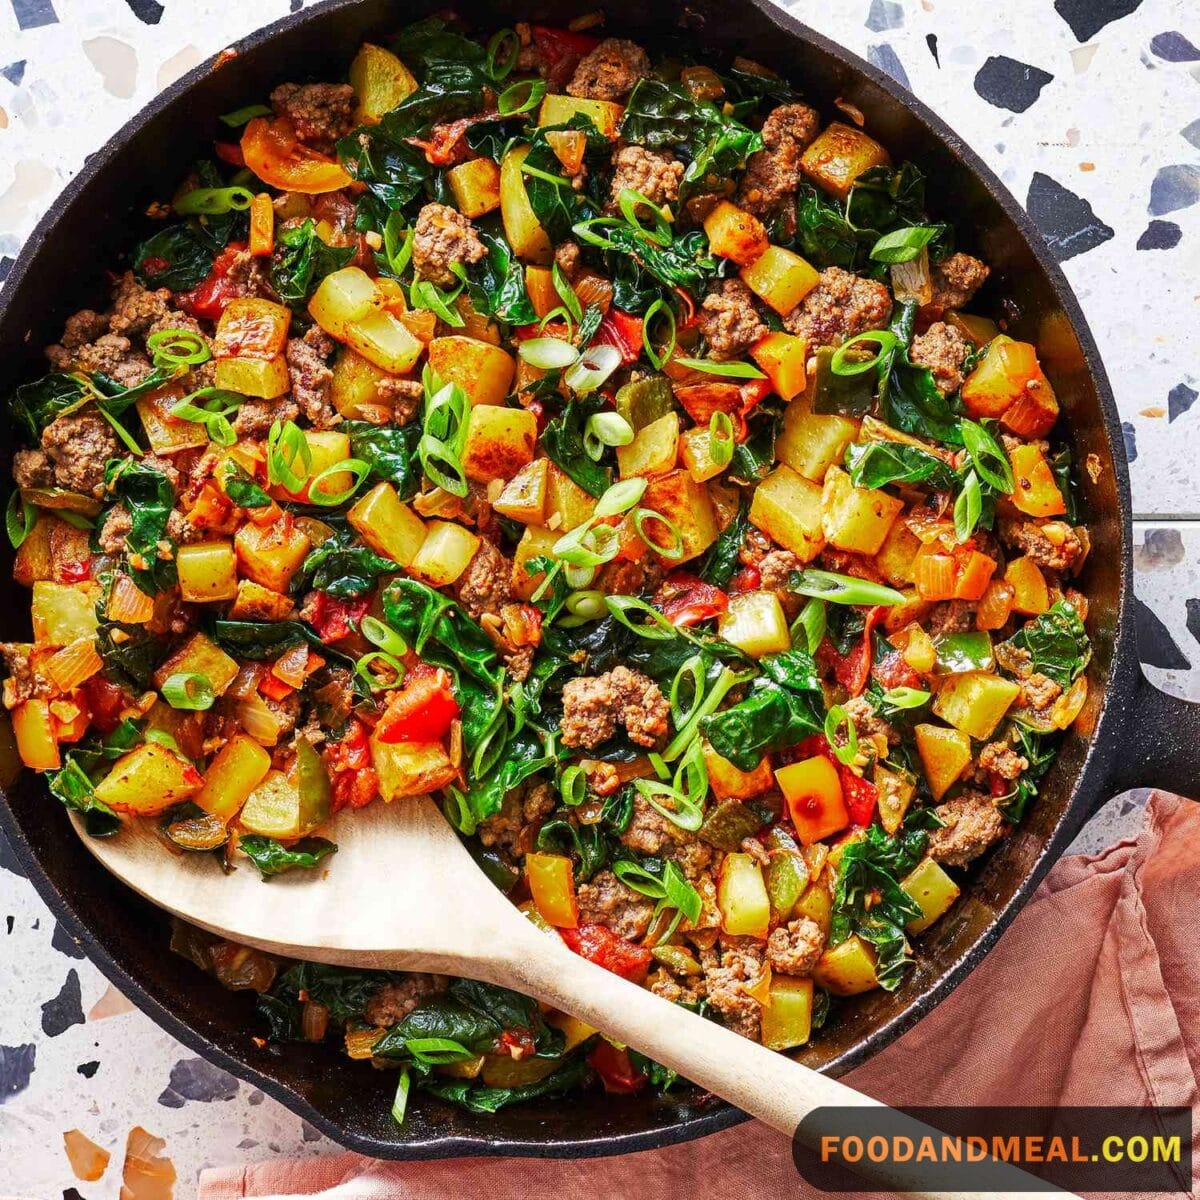 Beef And Potato Skillet